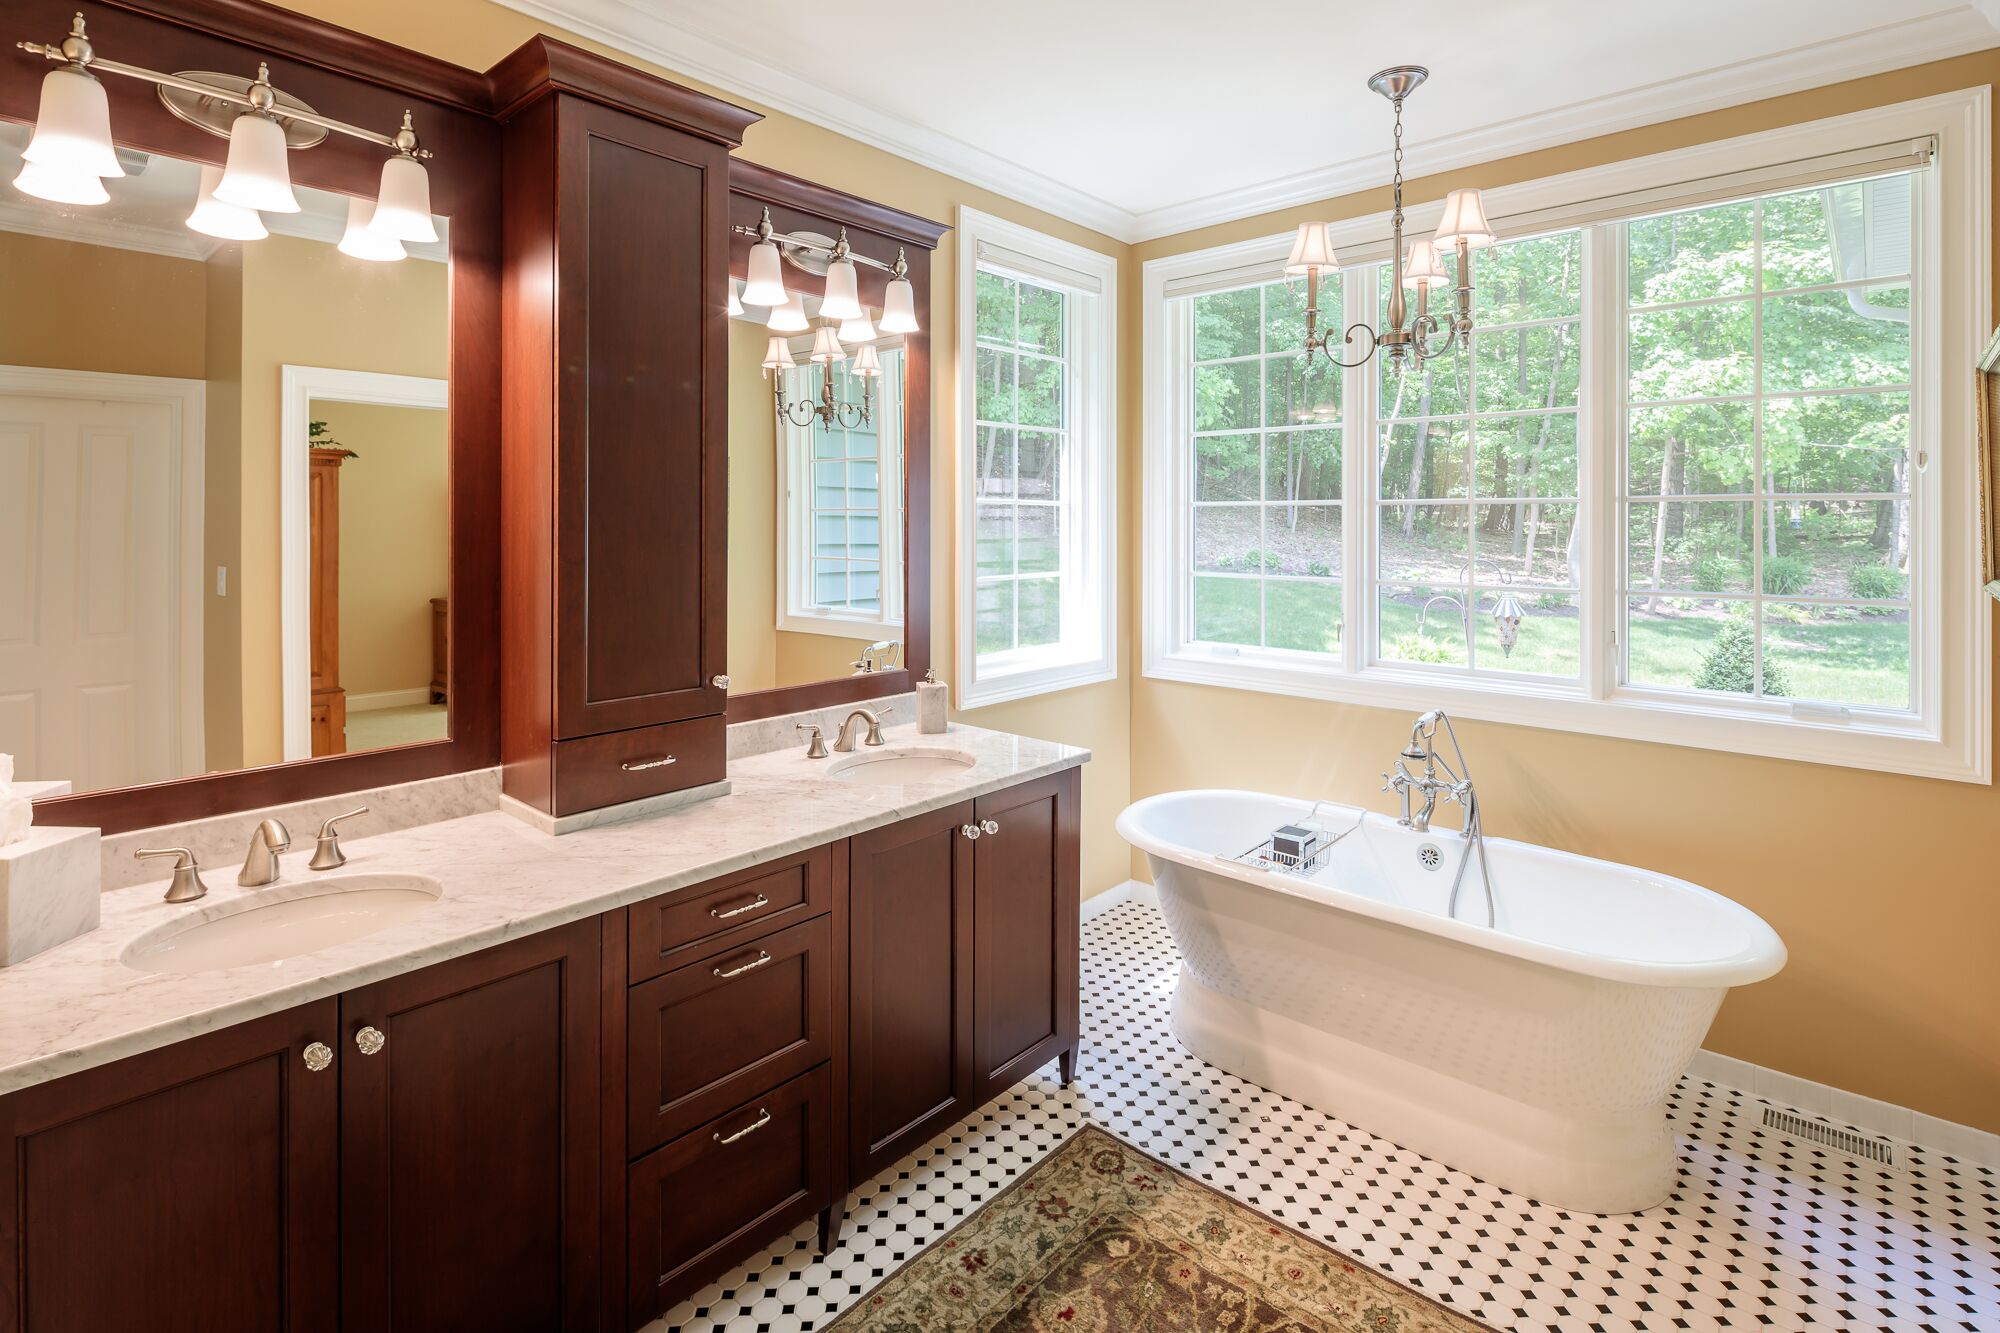 Ideas for bathrooms in a new house | Woodstone Custom Homes | Pittsford, NY